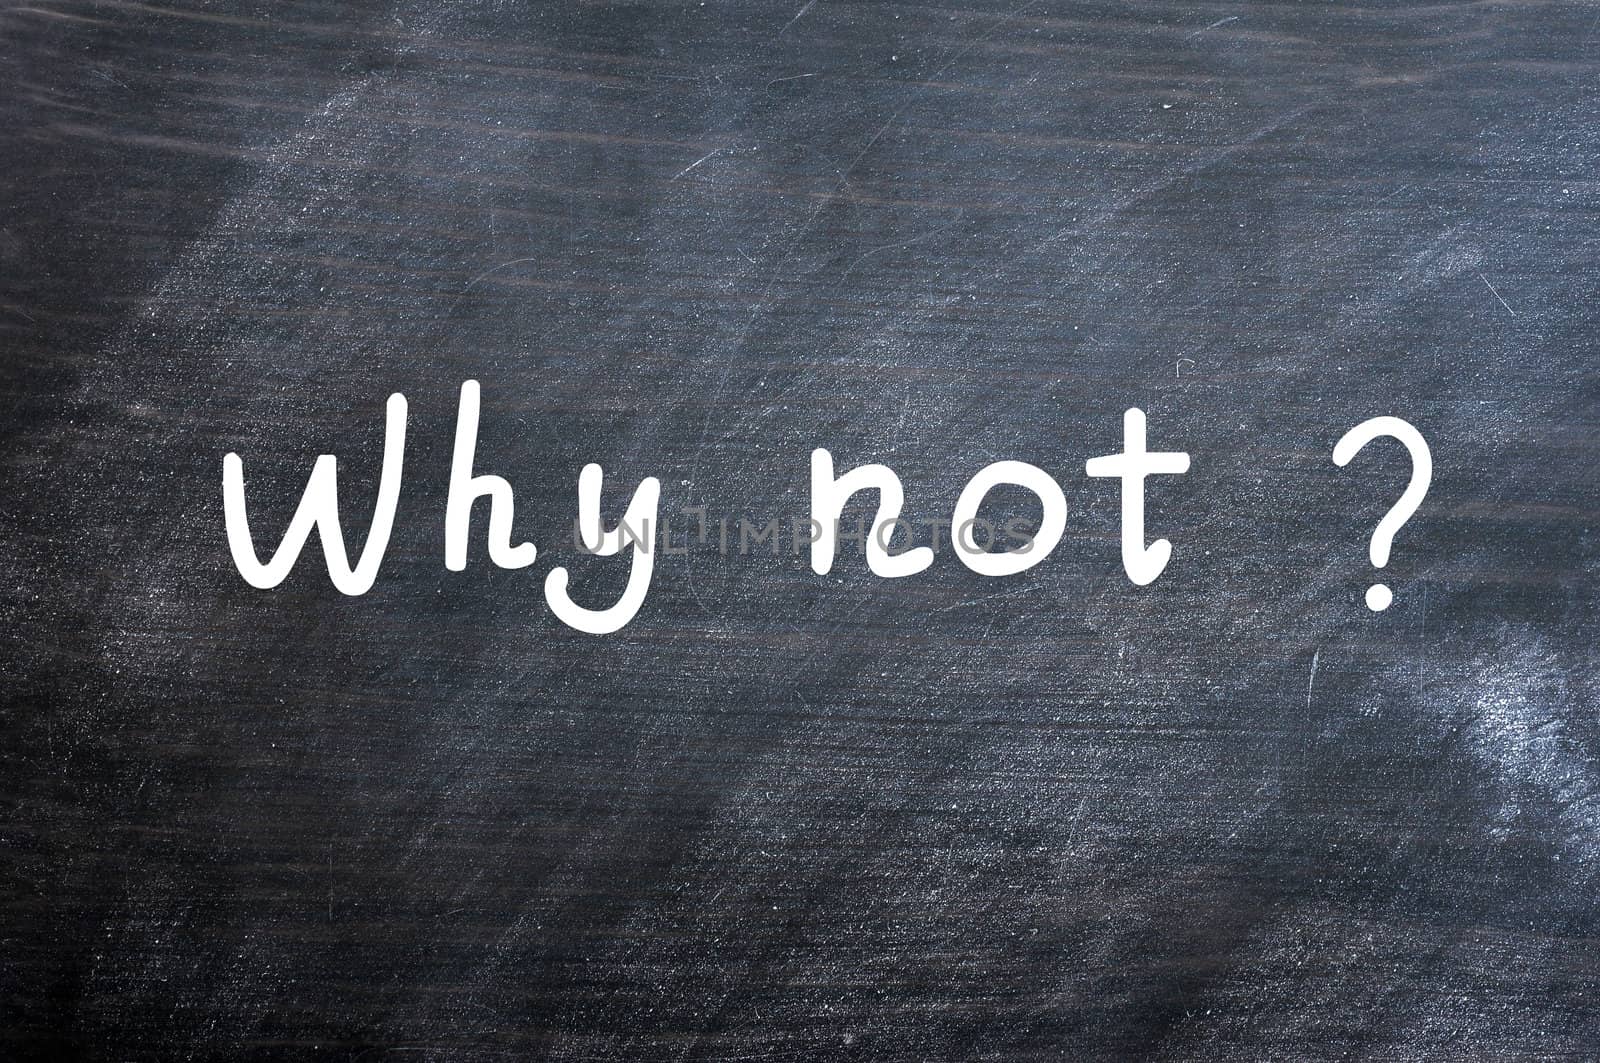 Why not - question written with white chalk on a blackboard